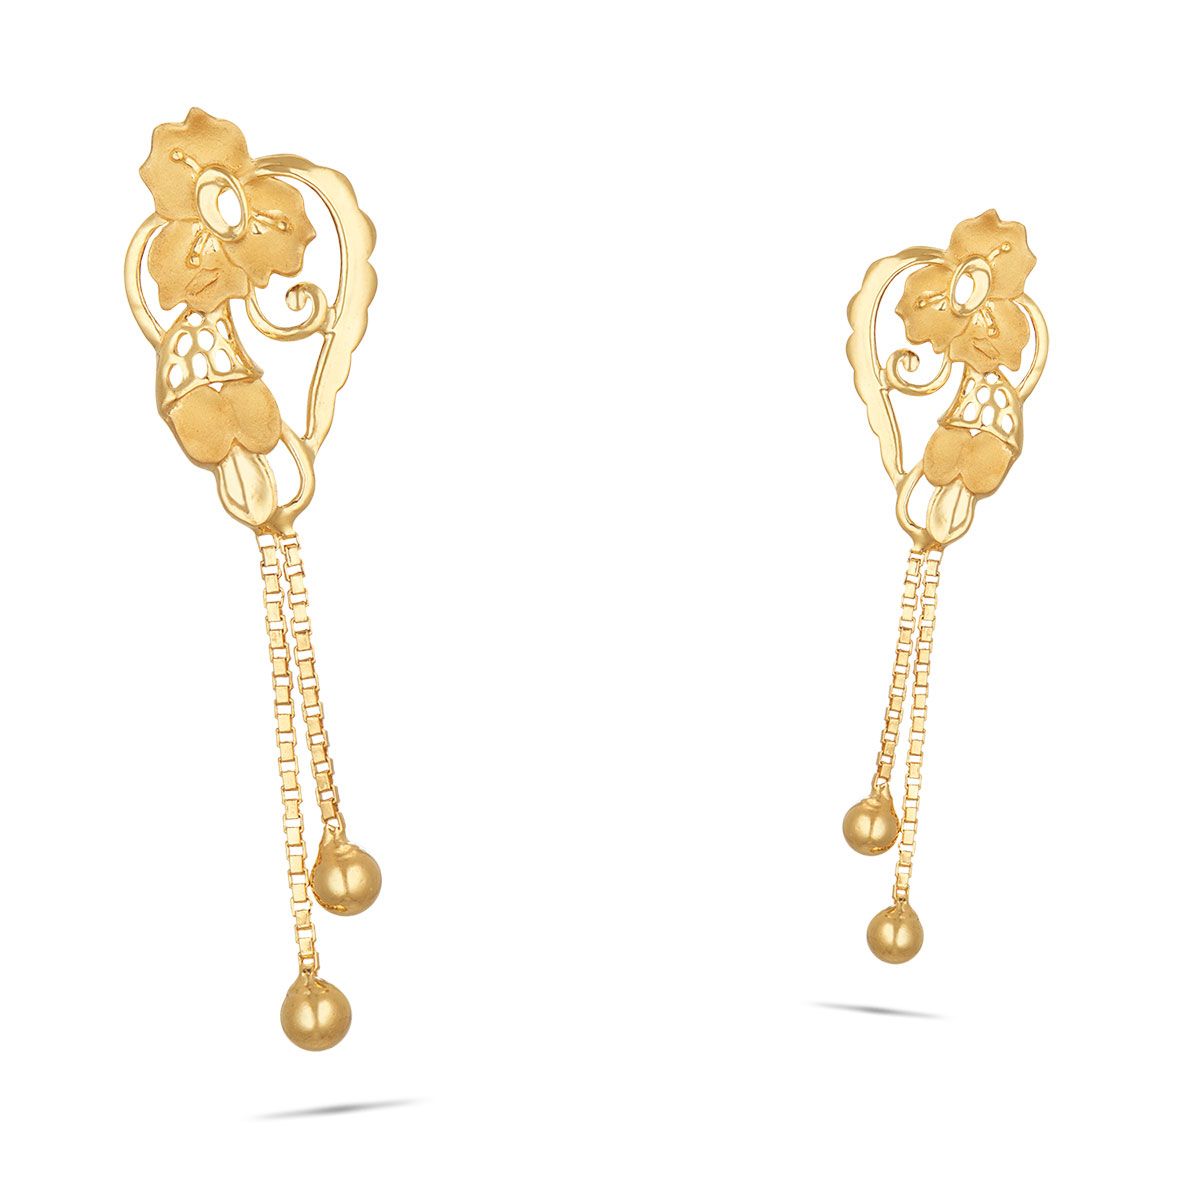 22K Gold Plated Green And Pink Stone Chaandbali Earring – Curio Cottage